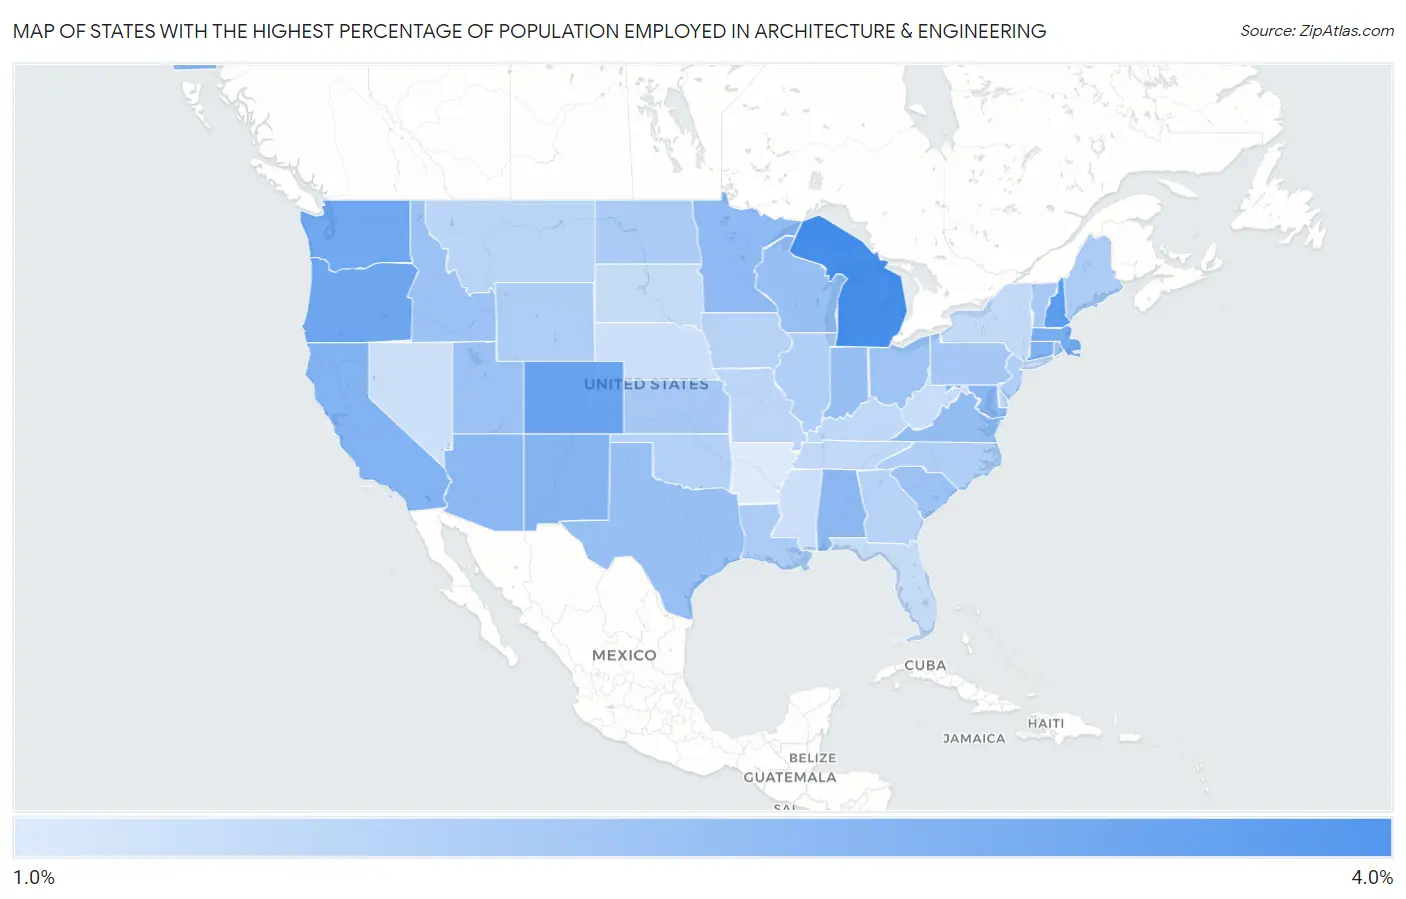 States with the Highest Percentage of Population Employed in Architecture & Engineering in the United States Map